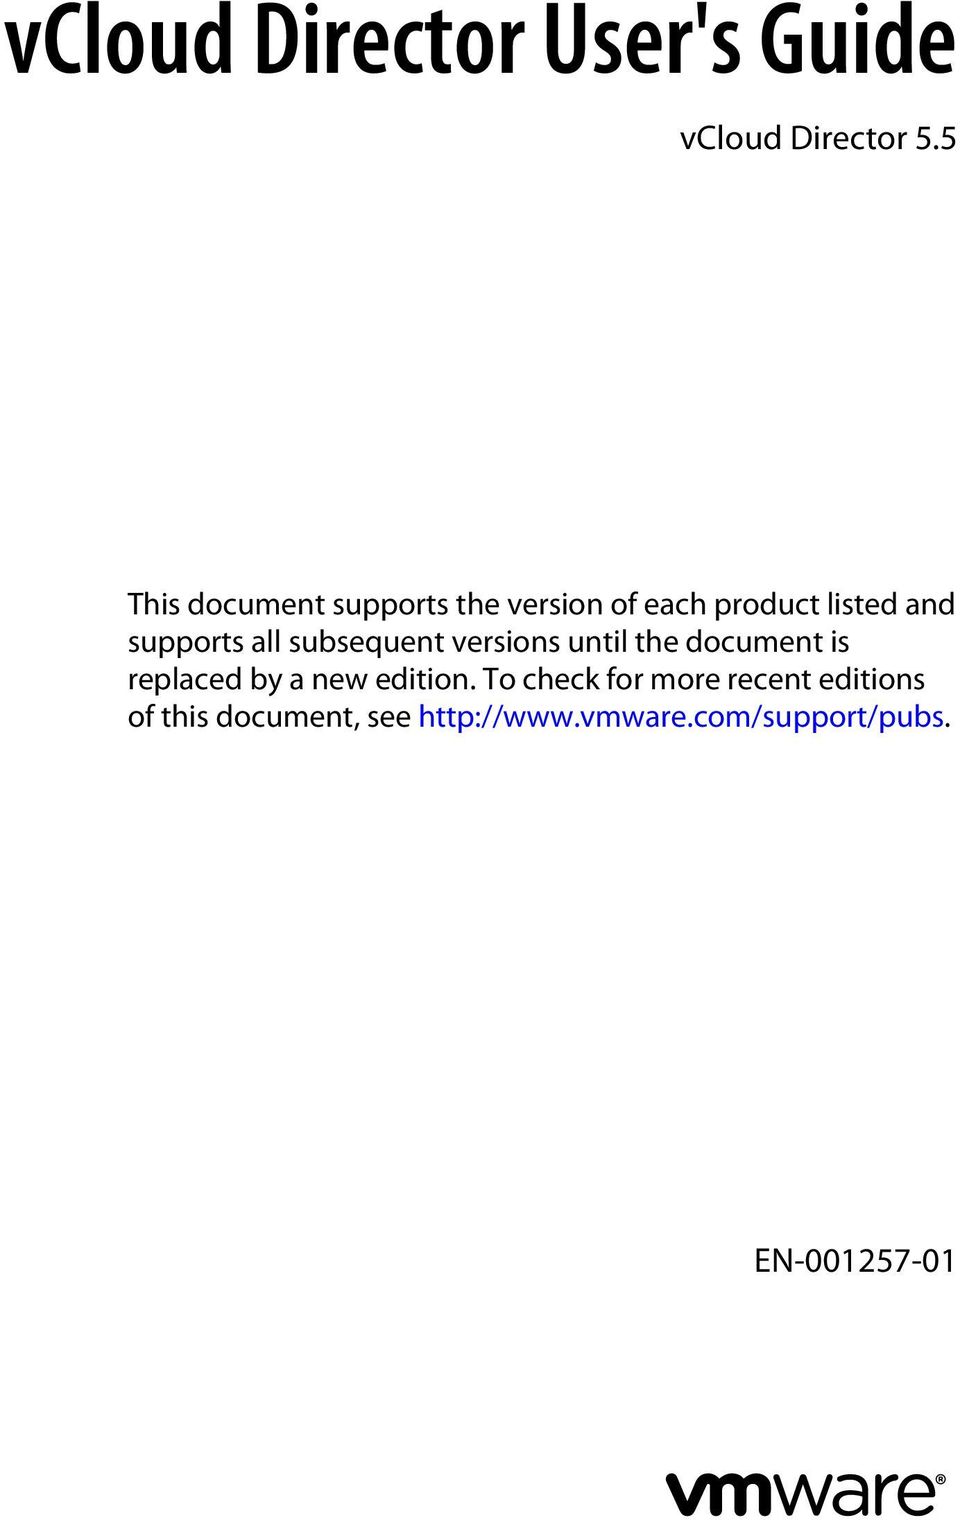 supports all subsequent versions until the document is replaced by